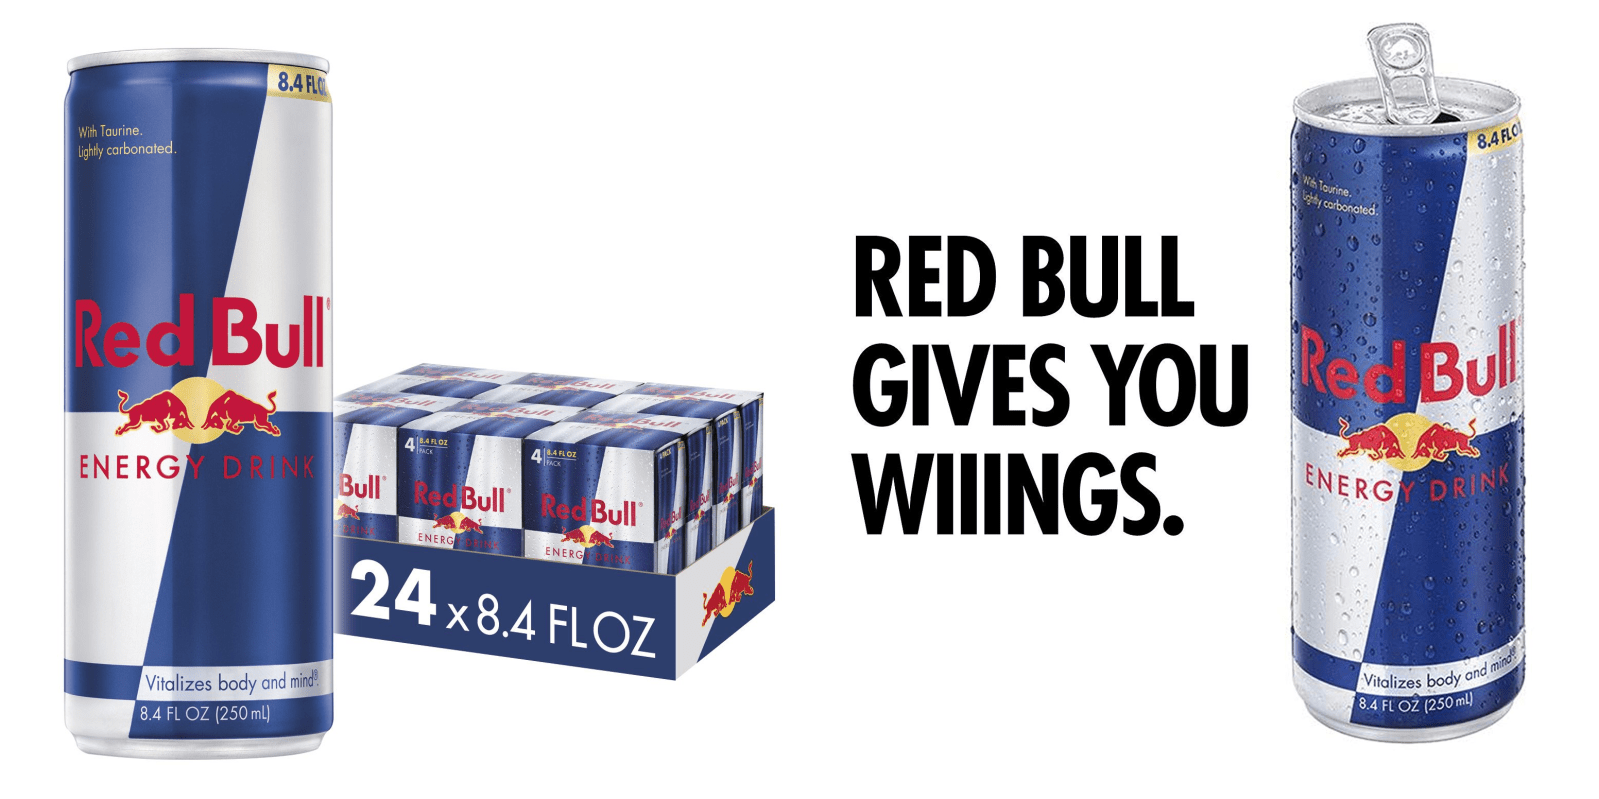 Acquire your Red Bull wings for only 1 per can with this 24pack from